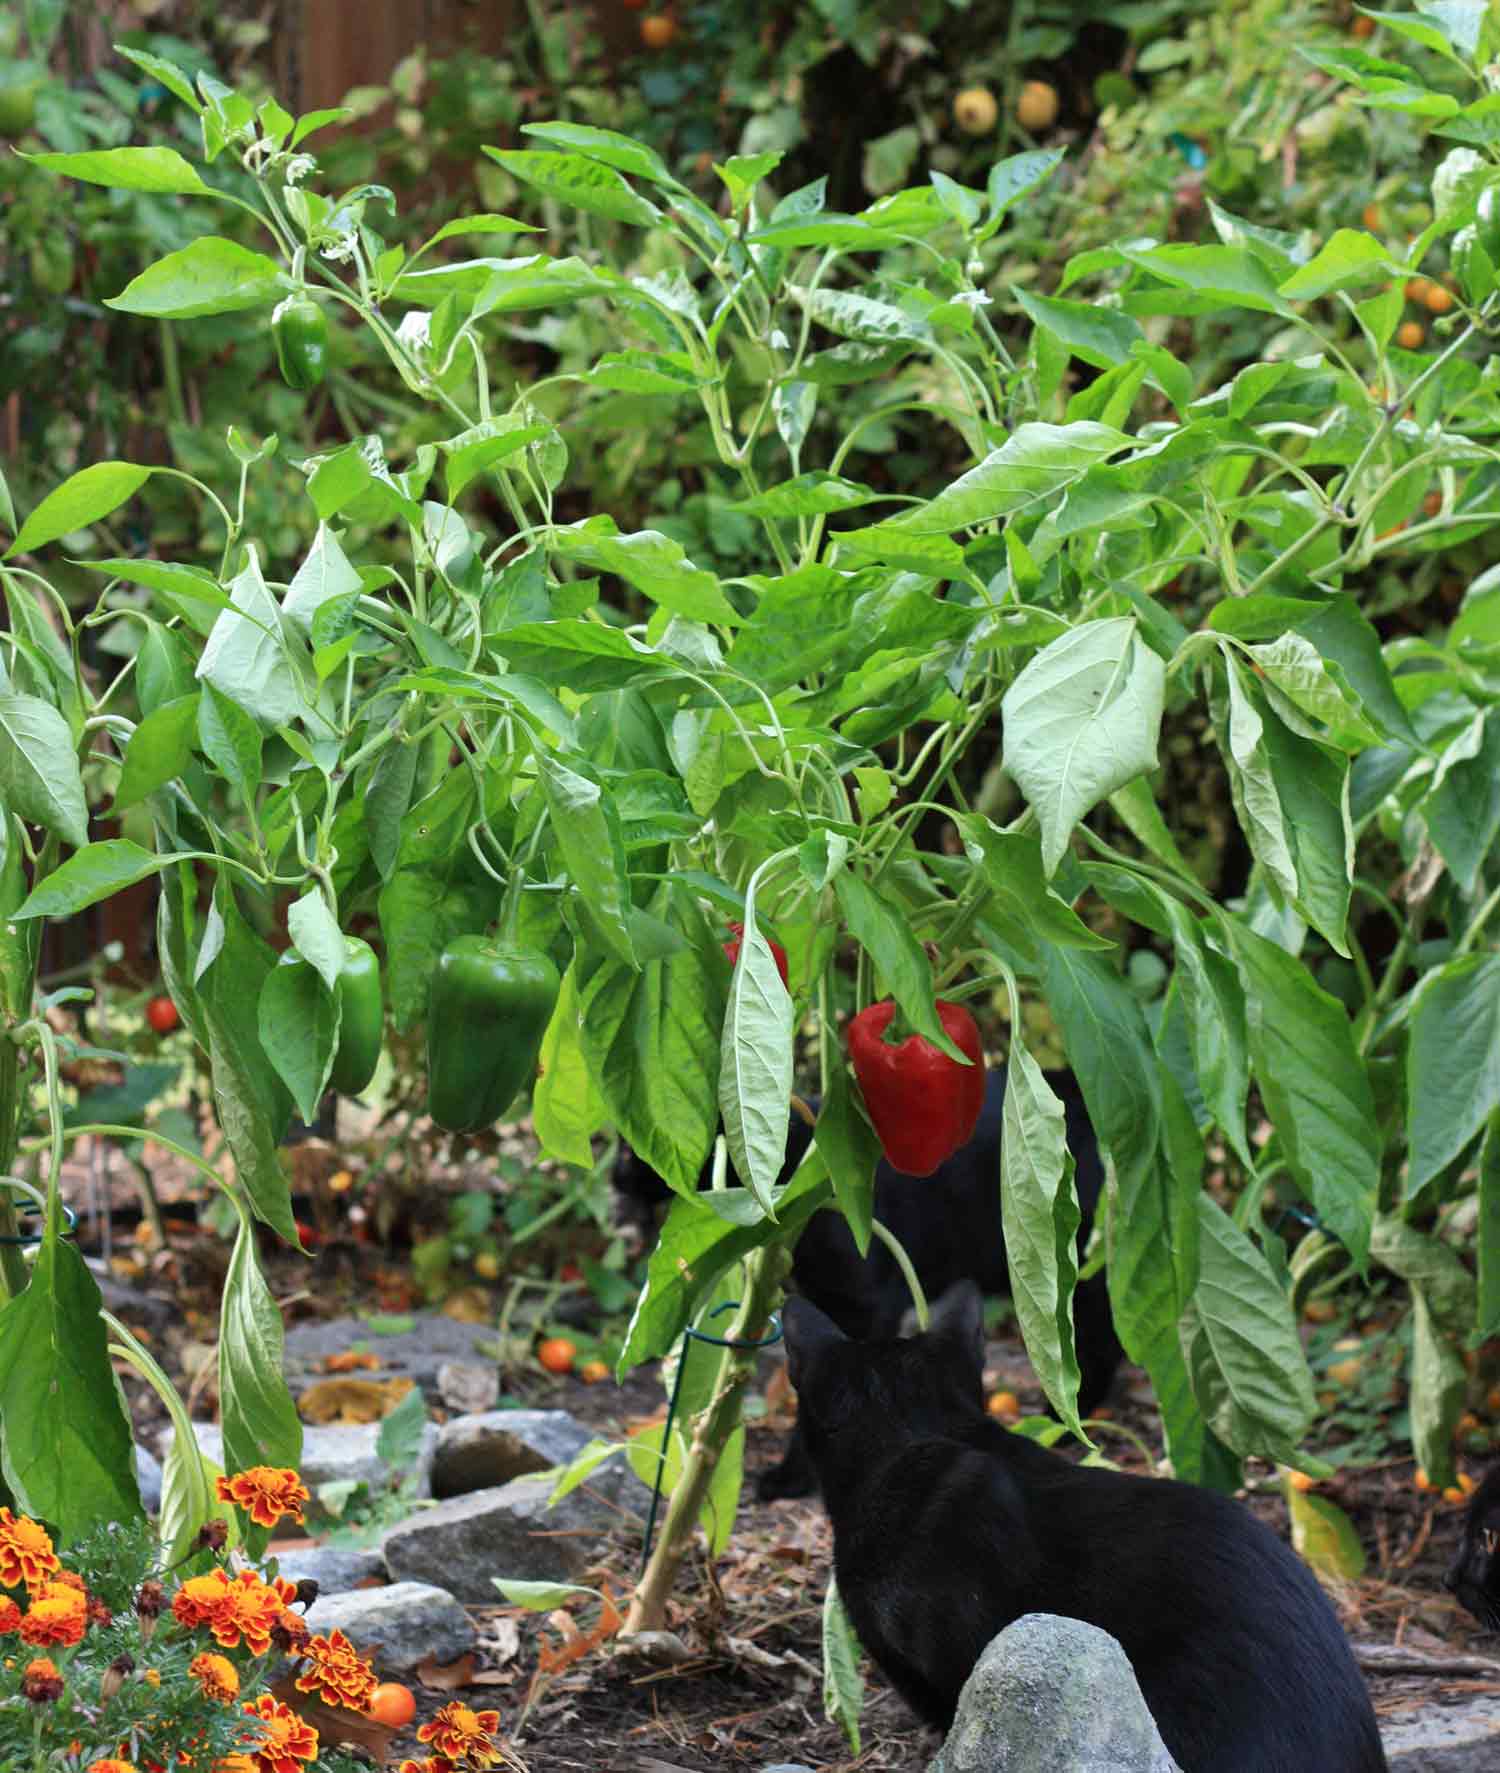 Bell pepper plants with green and red bell peppers.